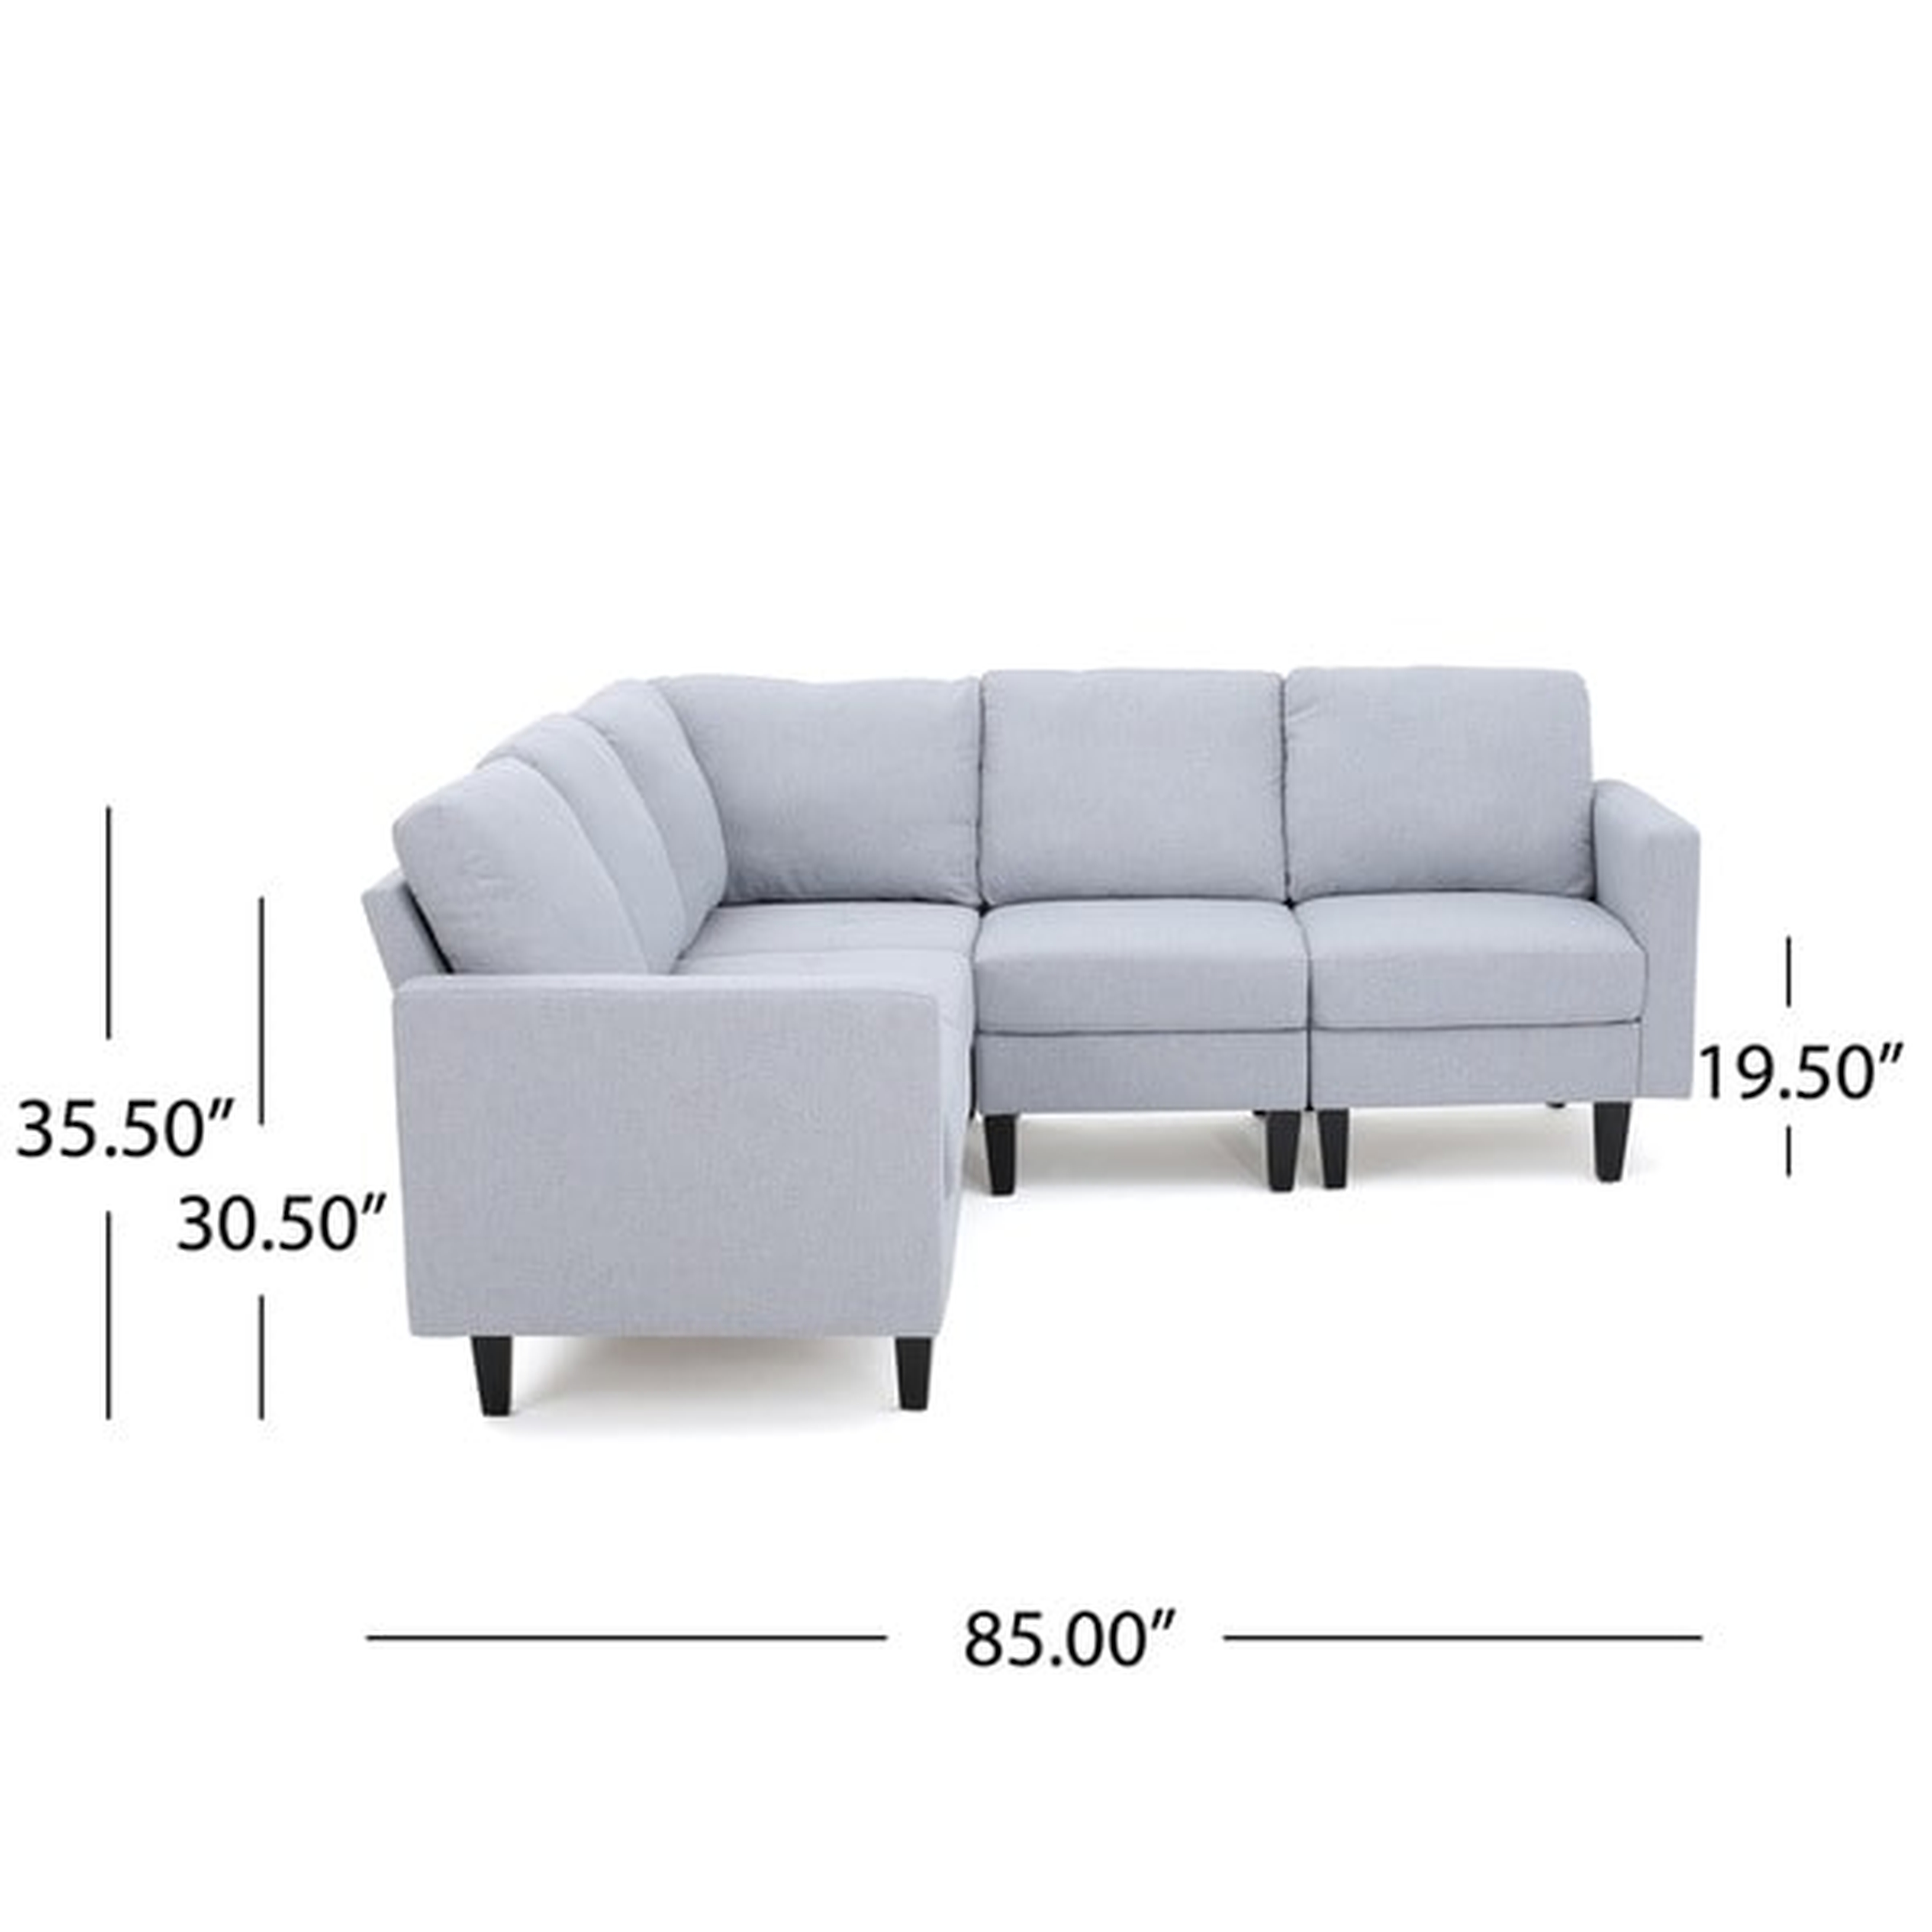 Zahra 5-piece Fabric Sofa Sectional by Christopher Knight Home - light grey option - Overstock